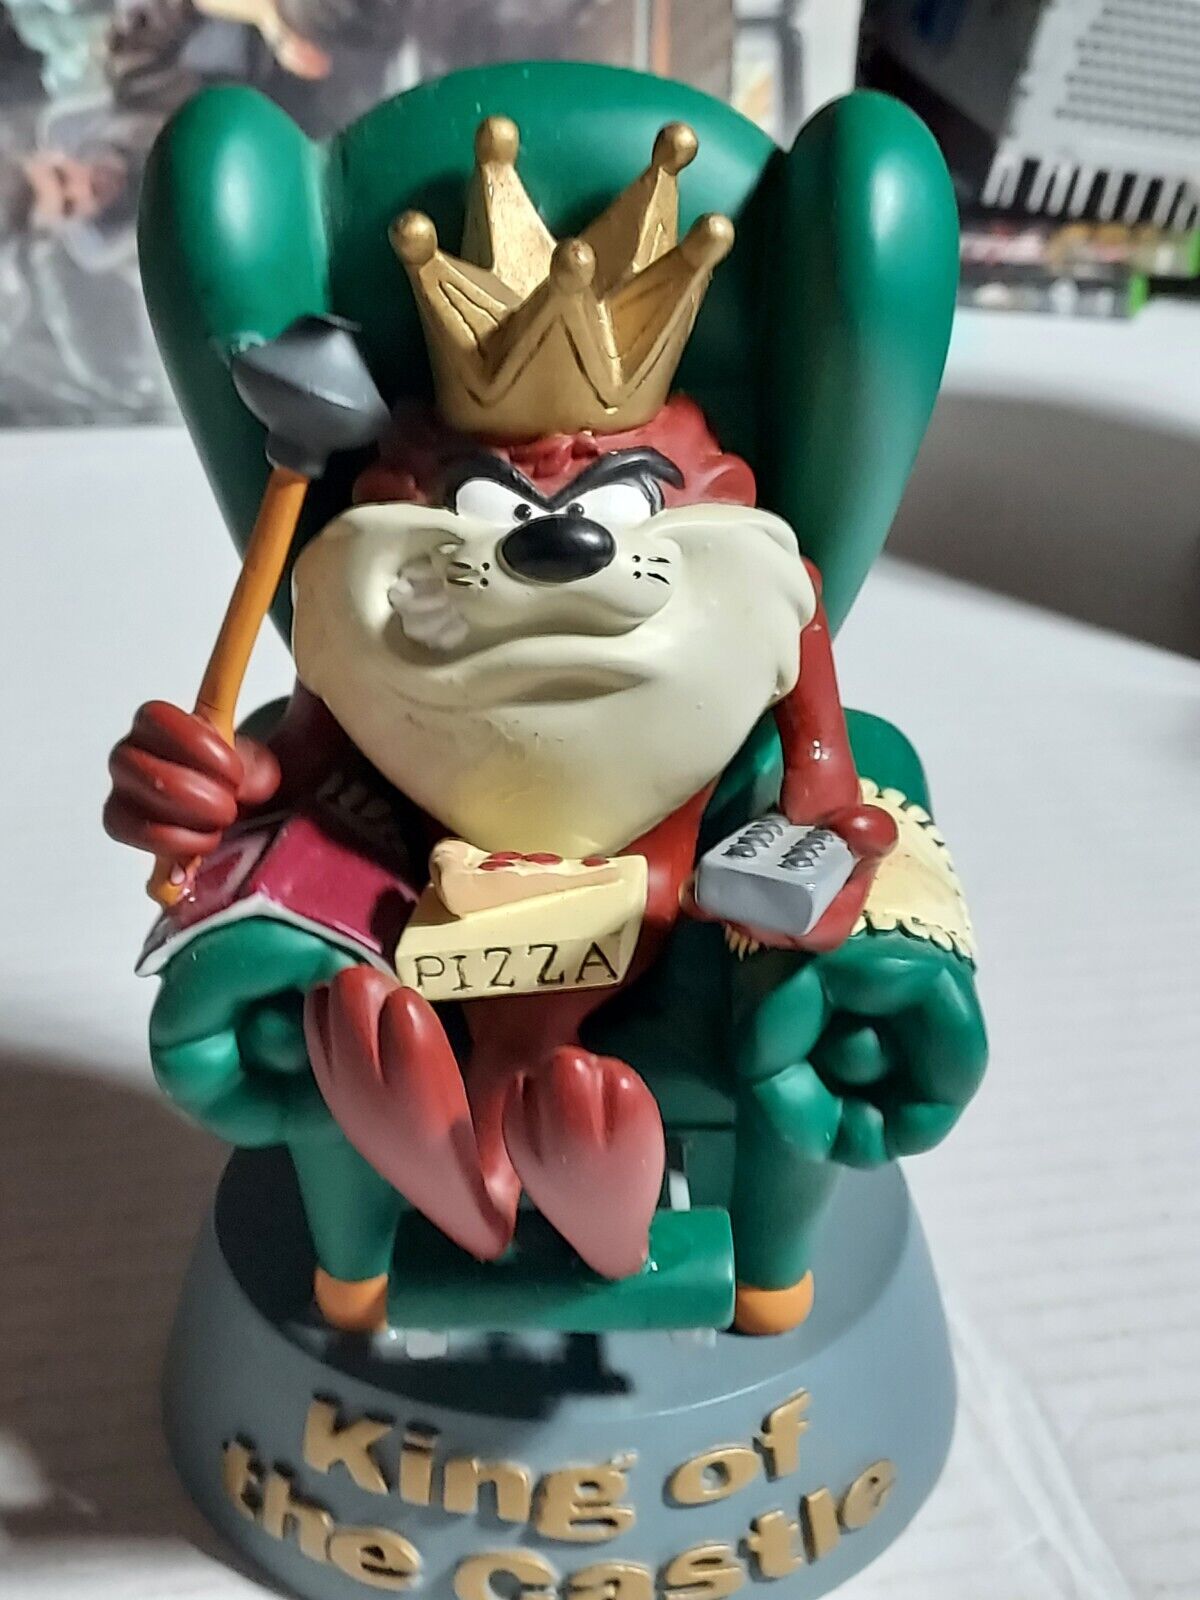 EXTREMELY RARE 1998 Warner Bros. Studio Store Exclusive Taz, King Of The Castle